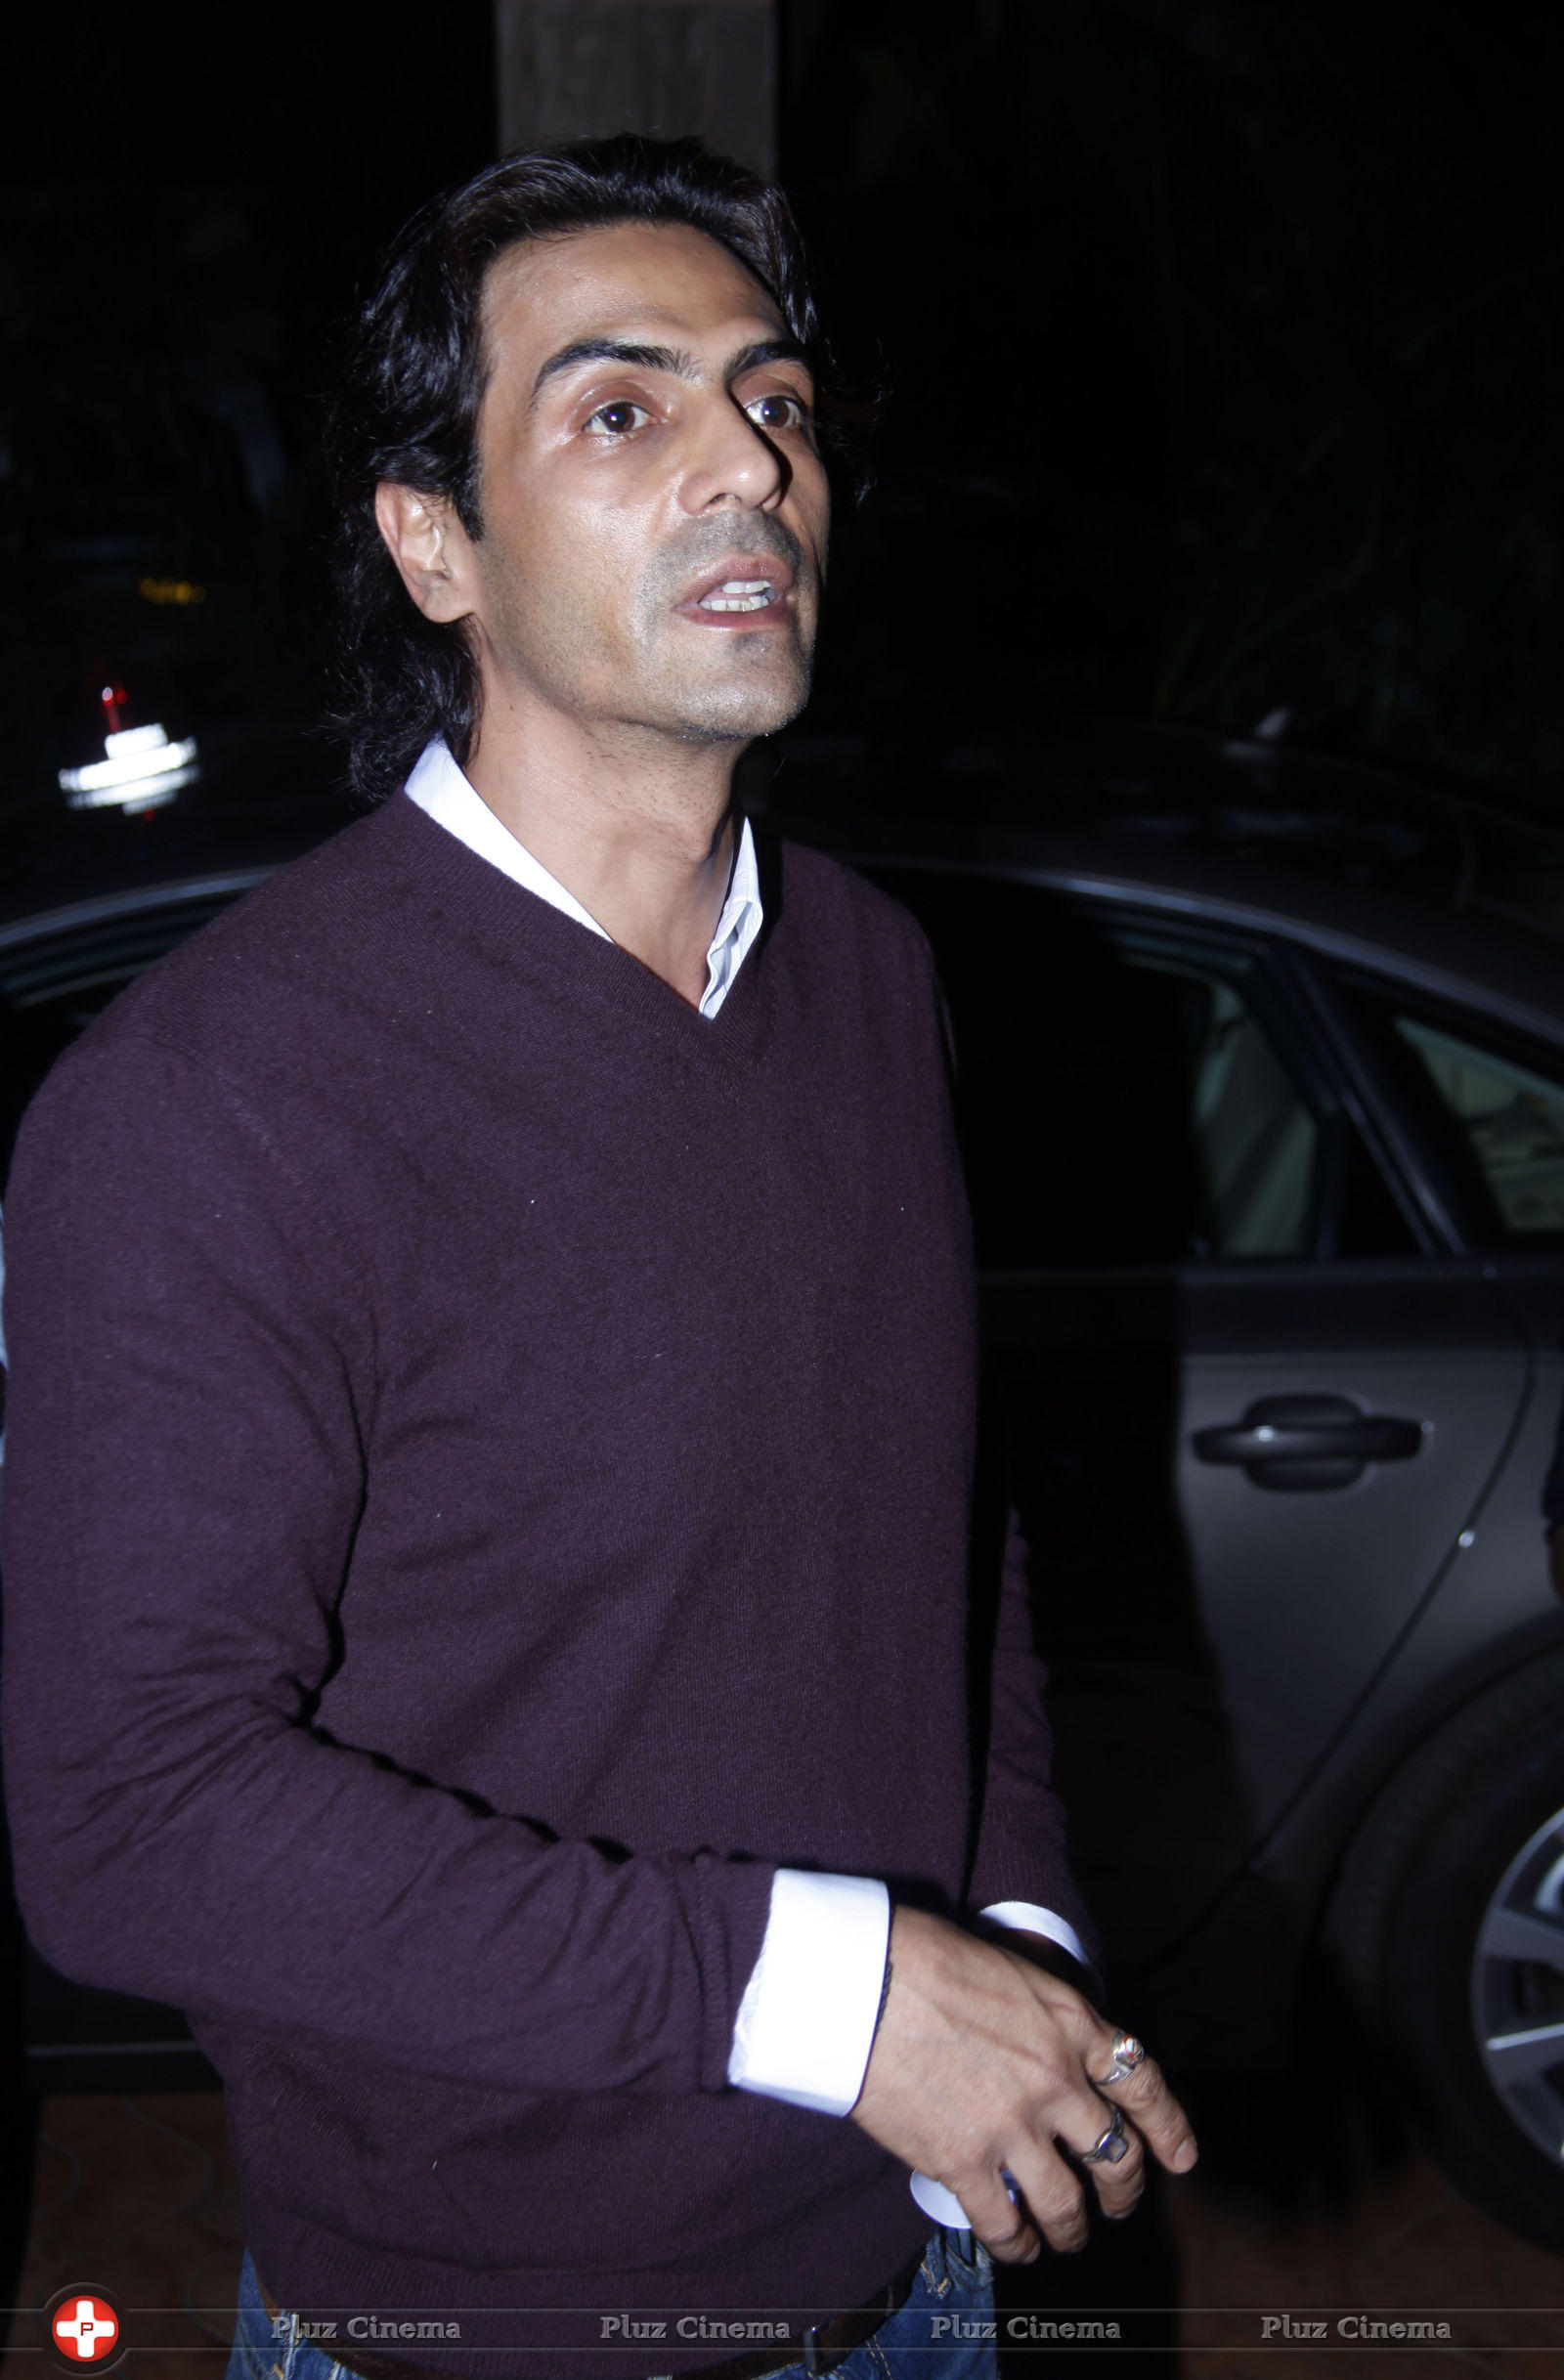 Arjun Rampal - Arjun Rampal meets Minister over elephant Sunder abuse case Photos | Picture 700208